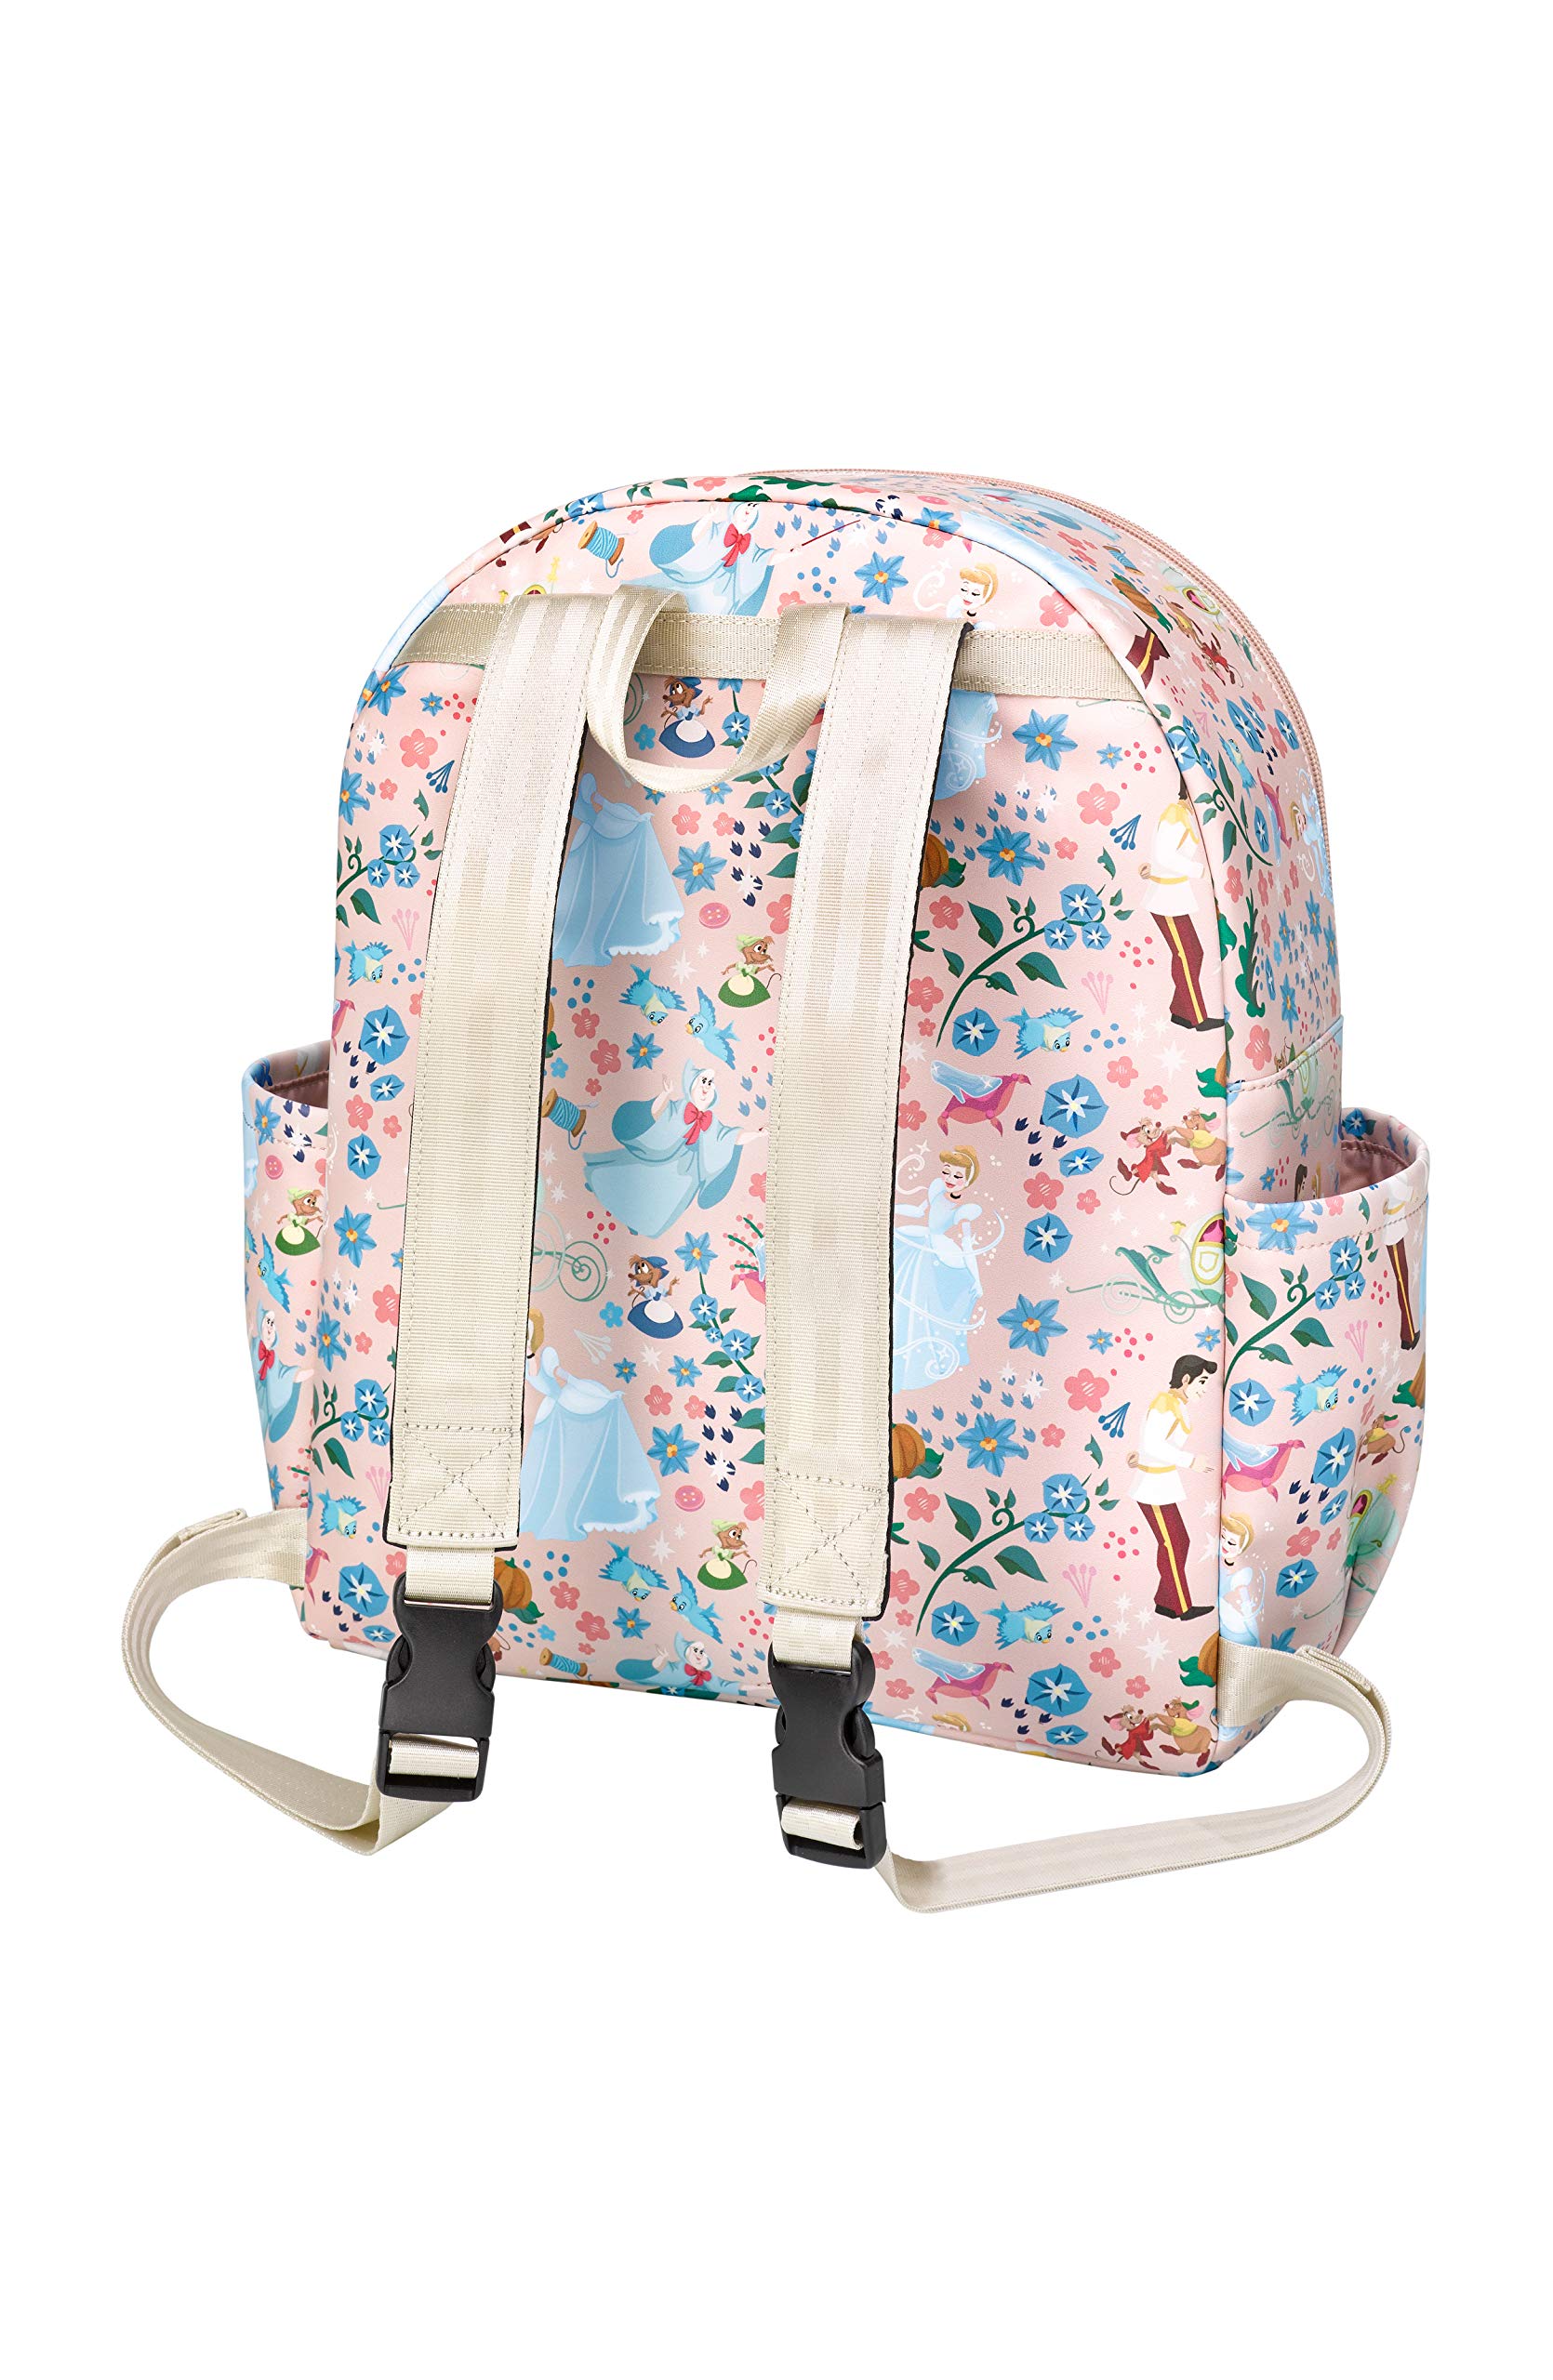 Petunia Pickle Bottom District Backpack | Baby Bag | Baby Diaper Bag for Parents | Baby Backpack Diaper Bag | Stylish, Spacious Backpack for On-The-Go Modern Moms & Dads | Cinderella Disney Collaboration